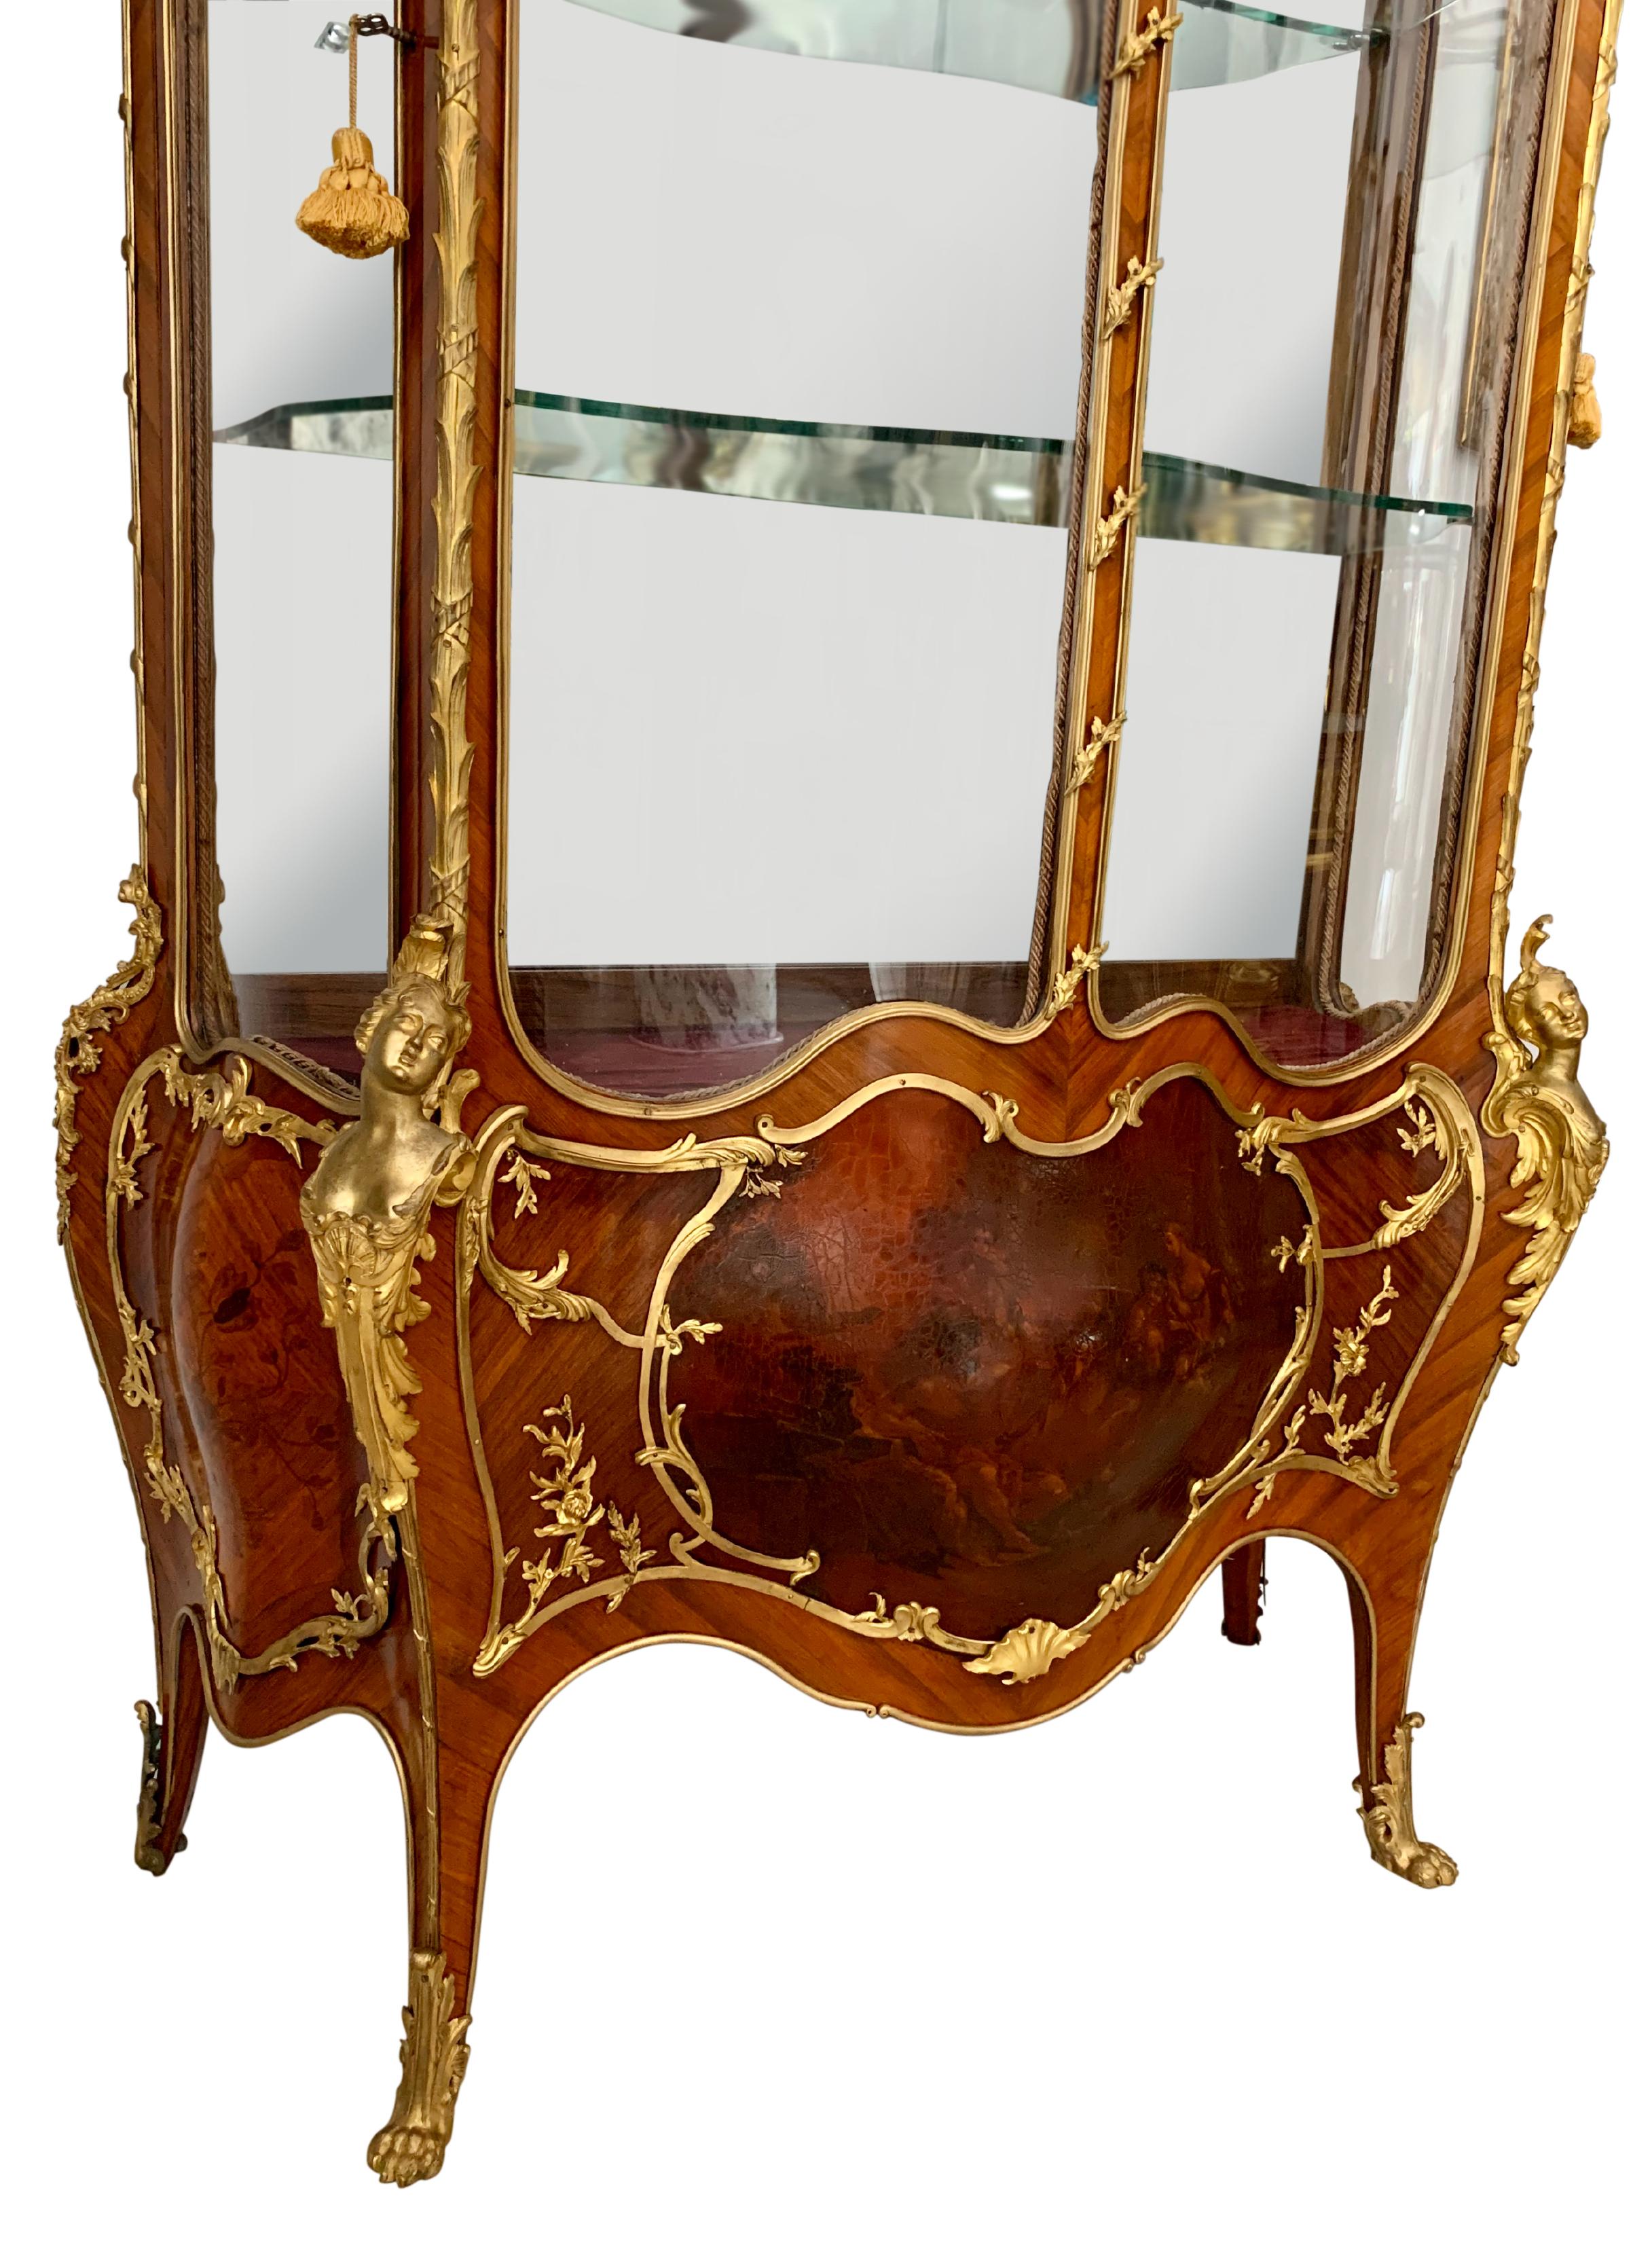 A Very Fine French 19th CenturyOrmolu-Mounted Louis XV Style Double-Door Vitrine For Sale 7